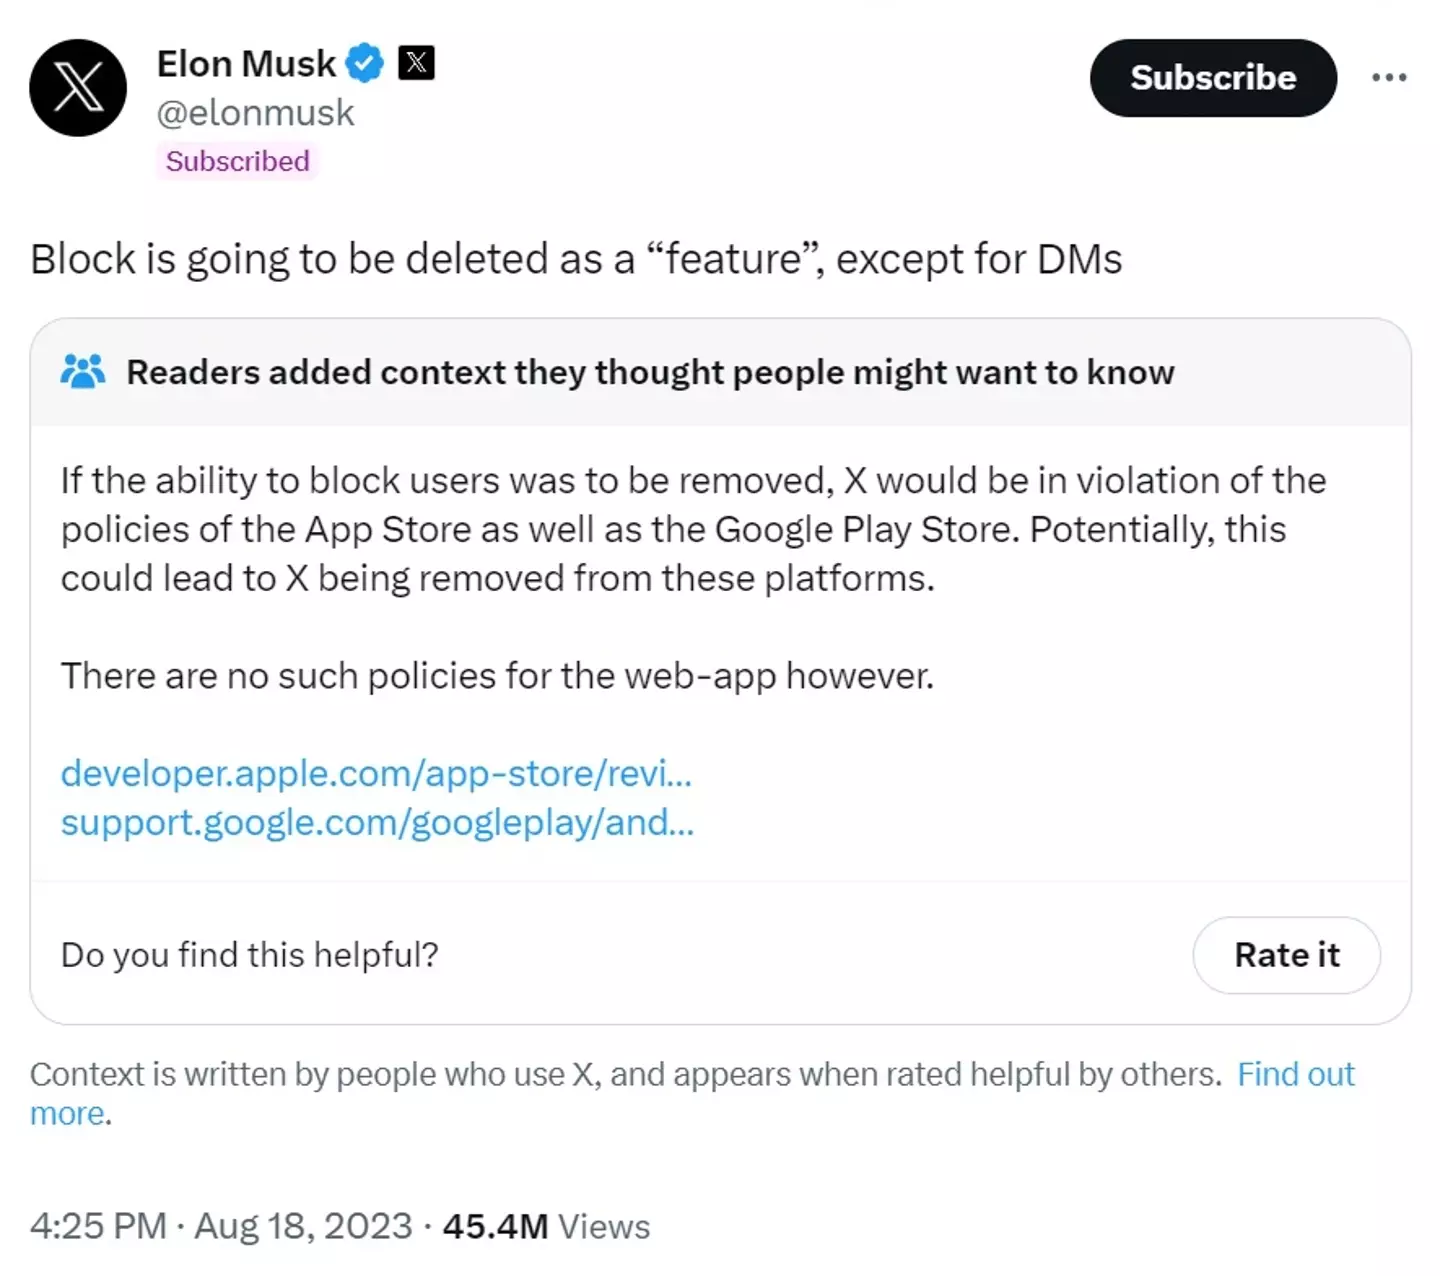 According to Elon Musk the ability to block other users will be removed except for DMs, but this might not be possible.